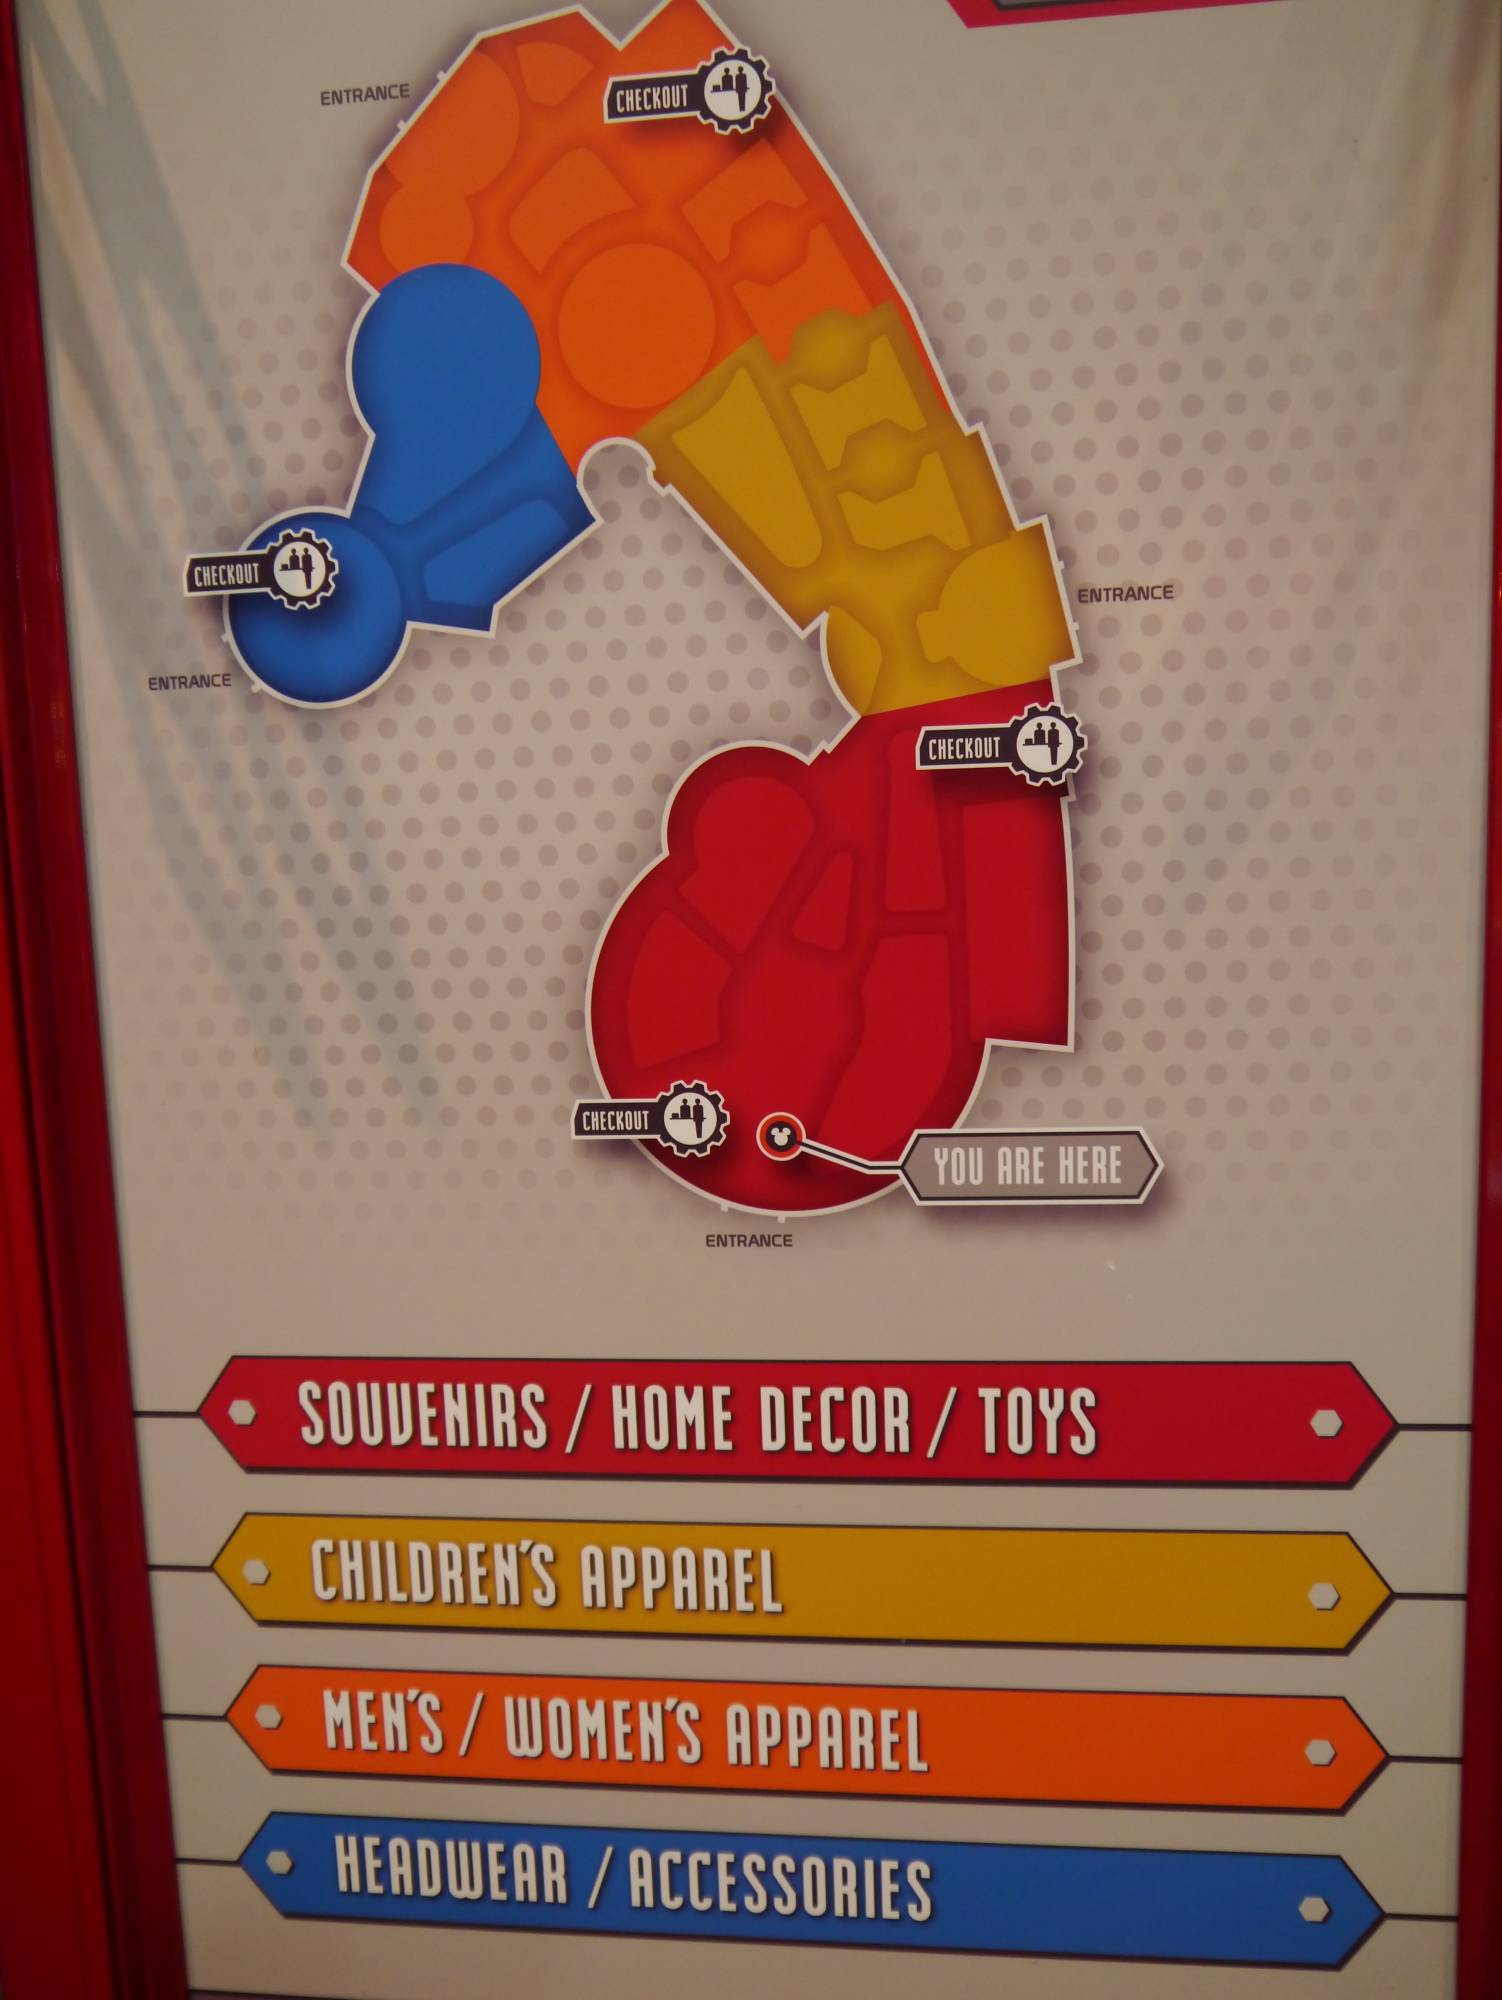 Epcot - MouseGears map